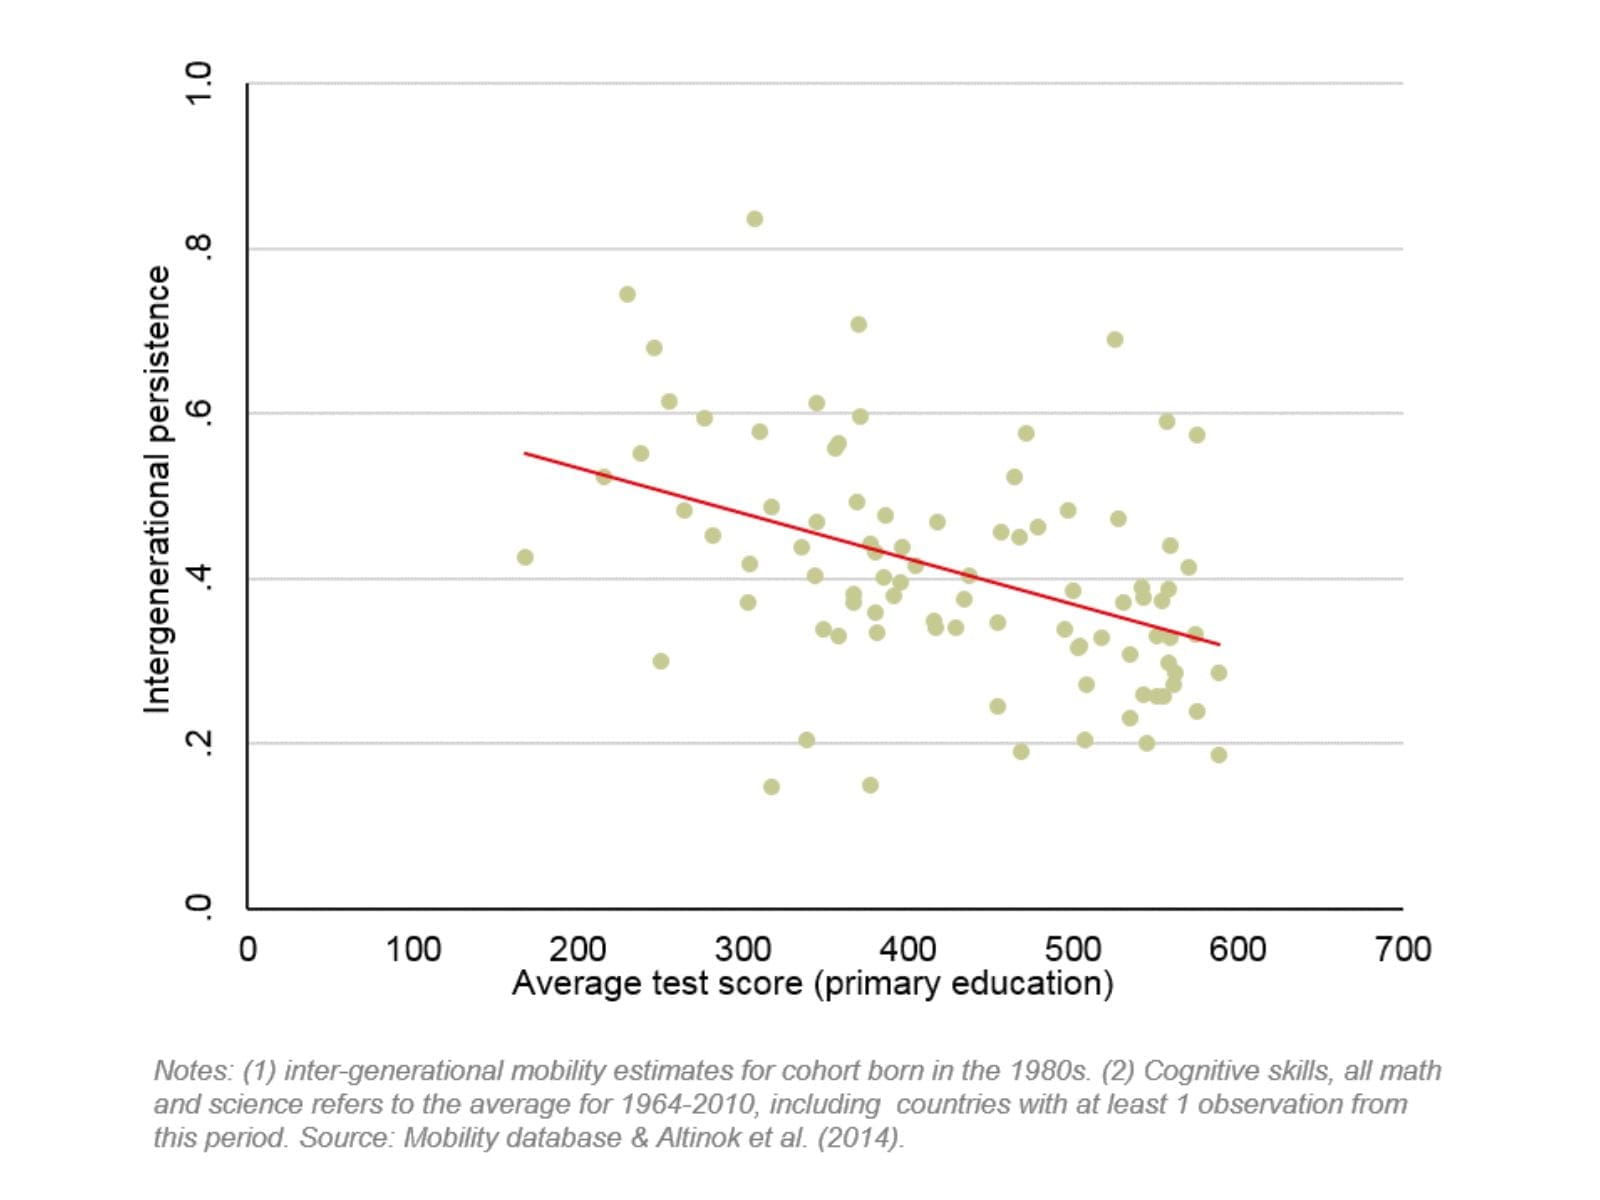 Graph showing Average test score (primary education) vs. Intergenerational persistence.